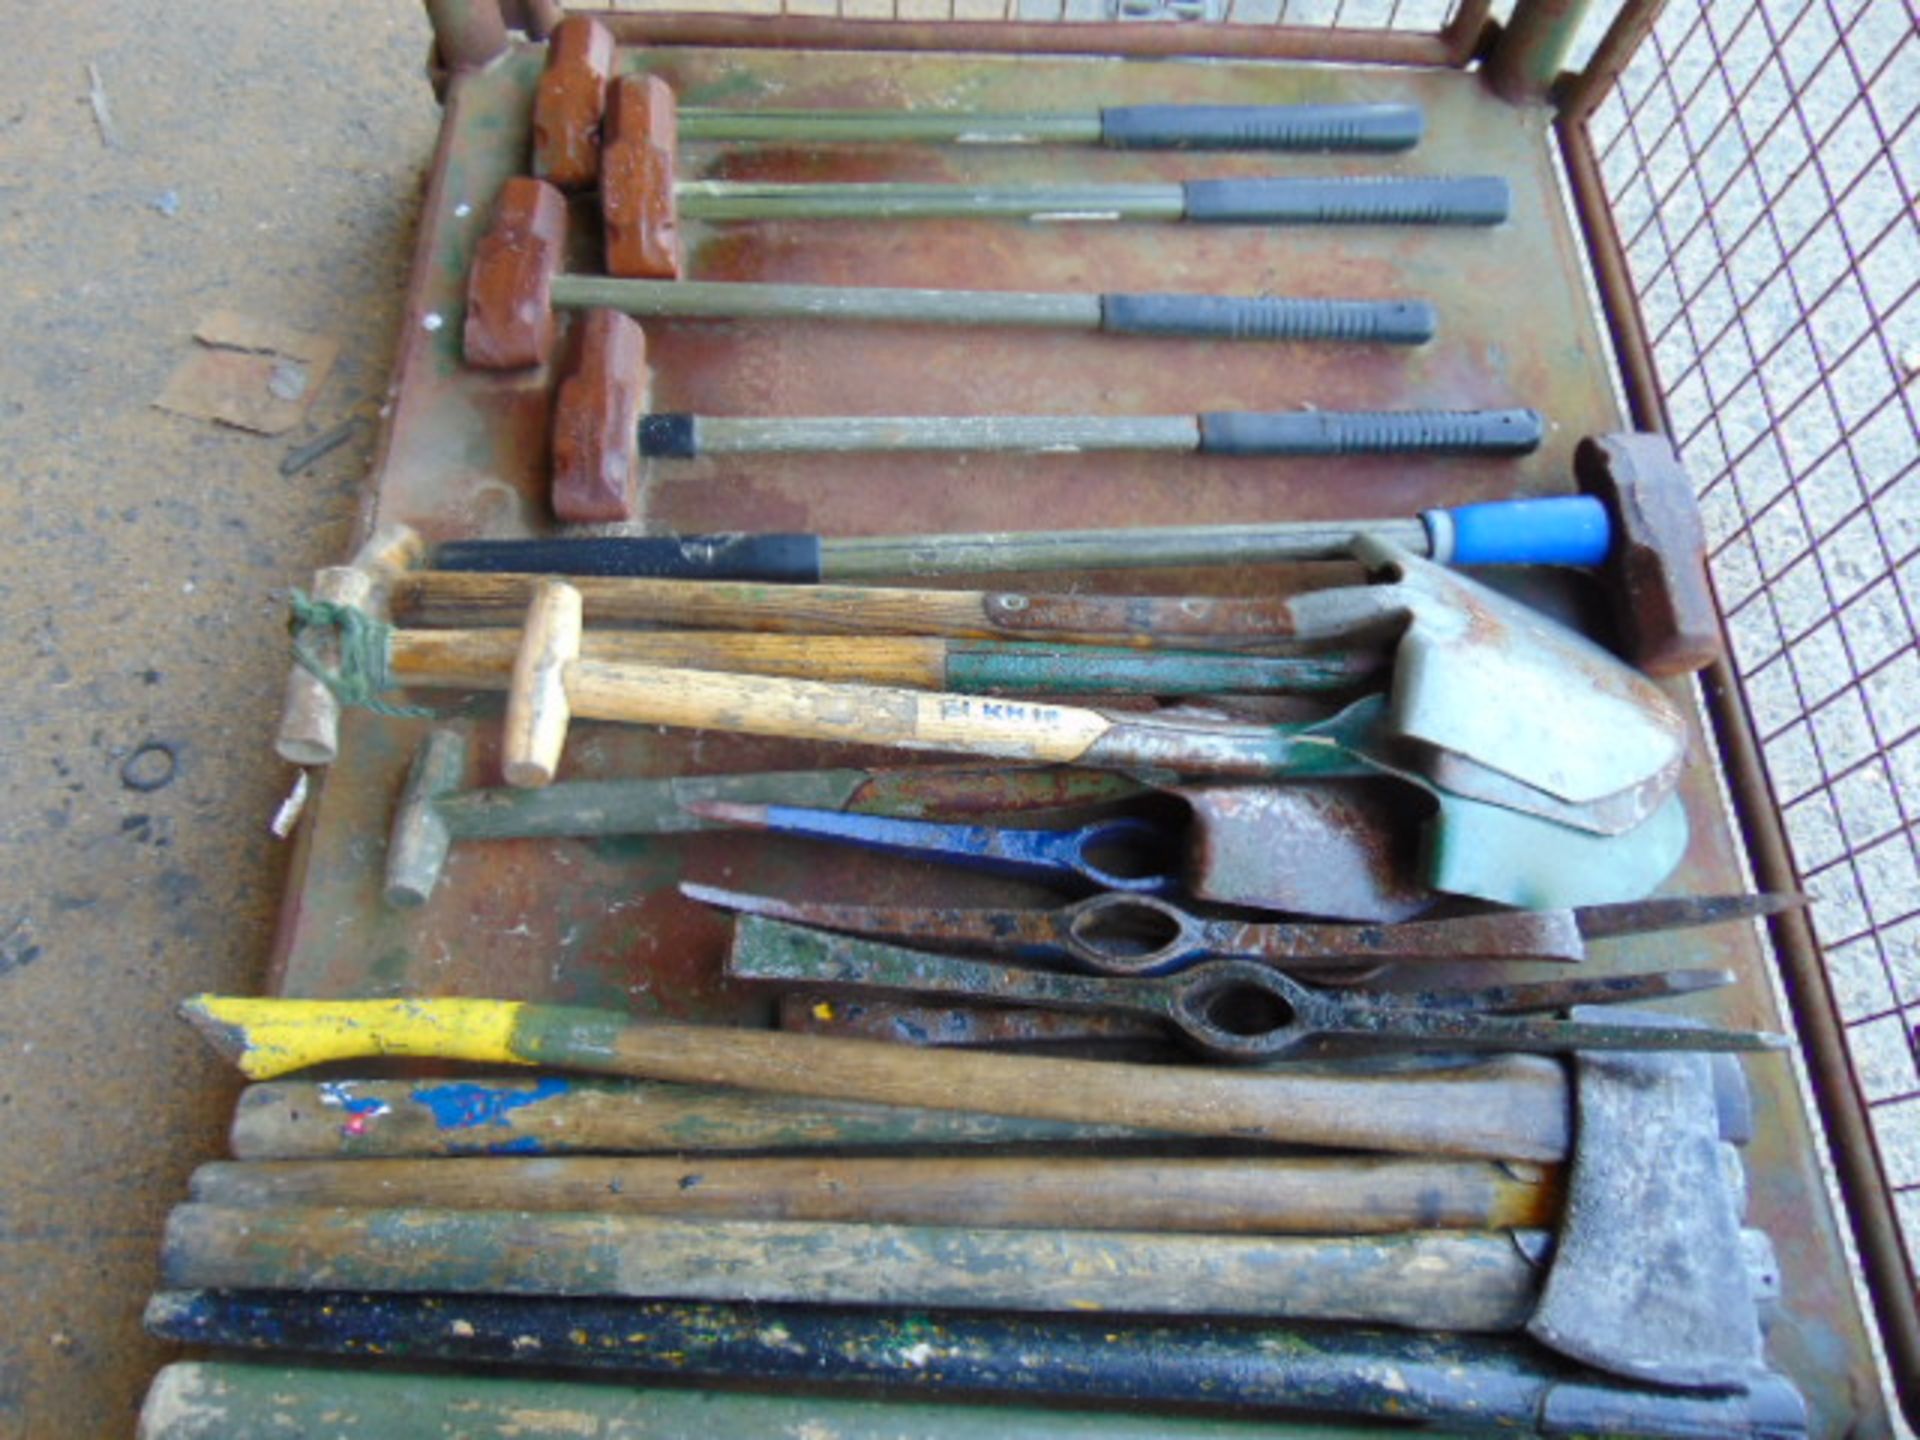 1 x Stillage British Army Axes, Sledge Hammers, T handle Shovels, Picks and helves (20 items) - Image 4 of 5